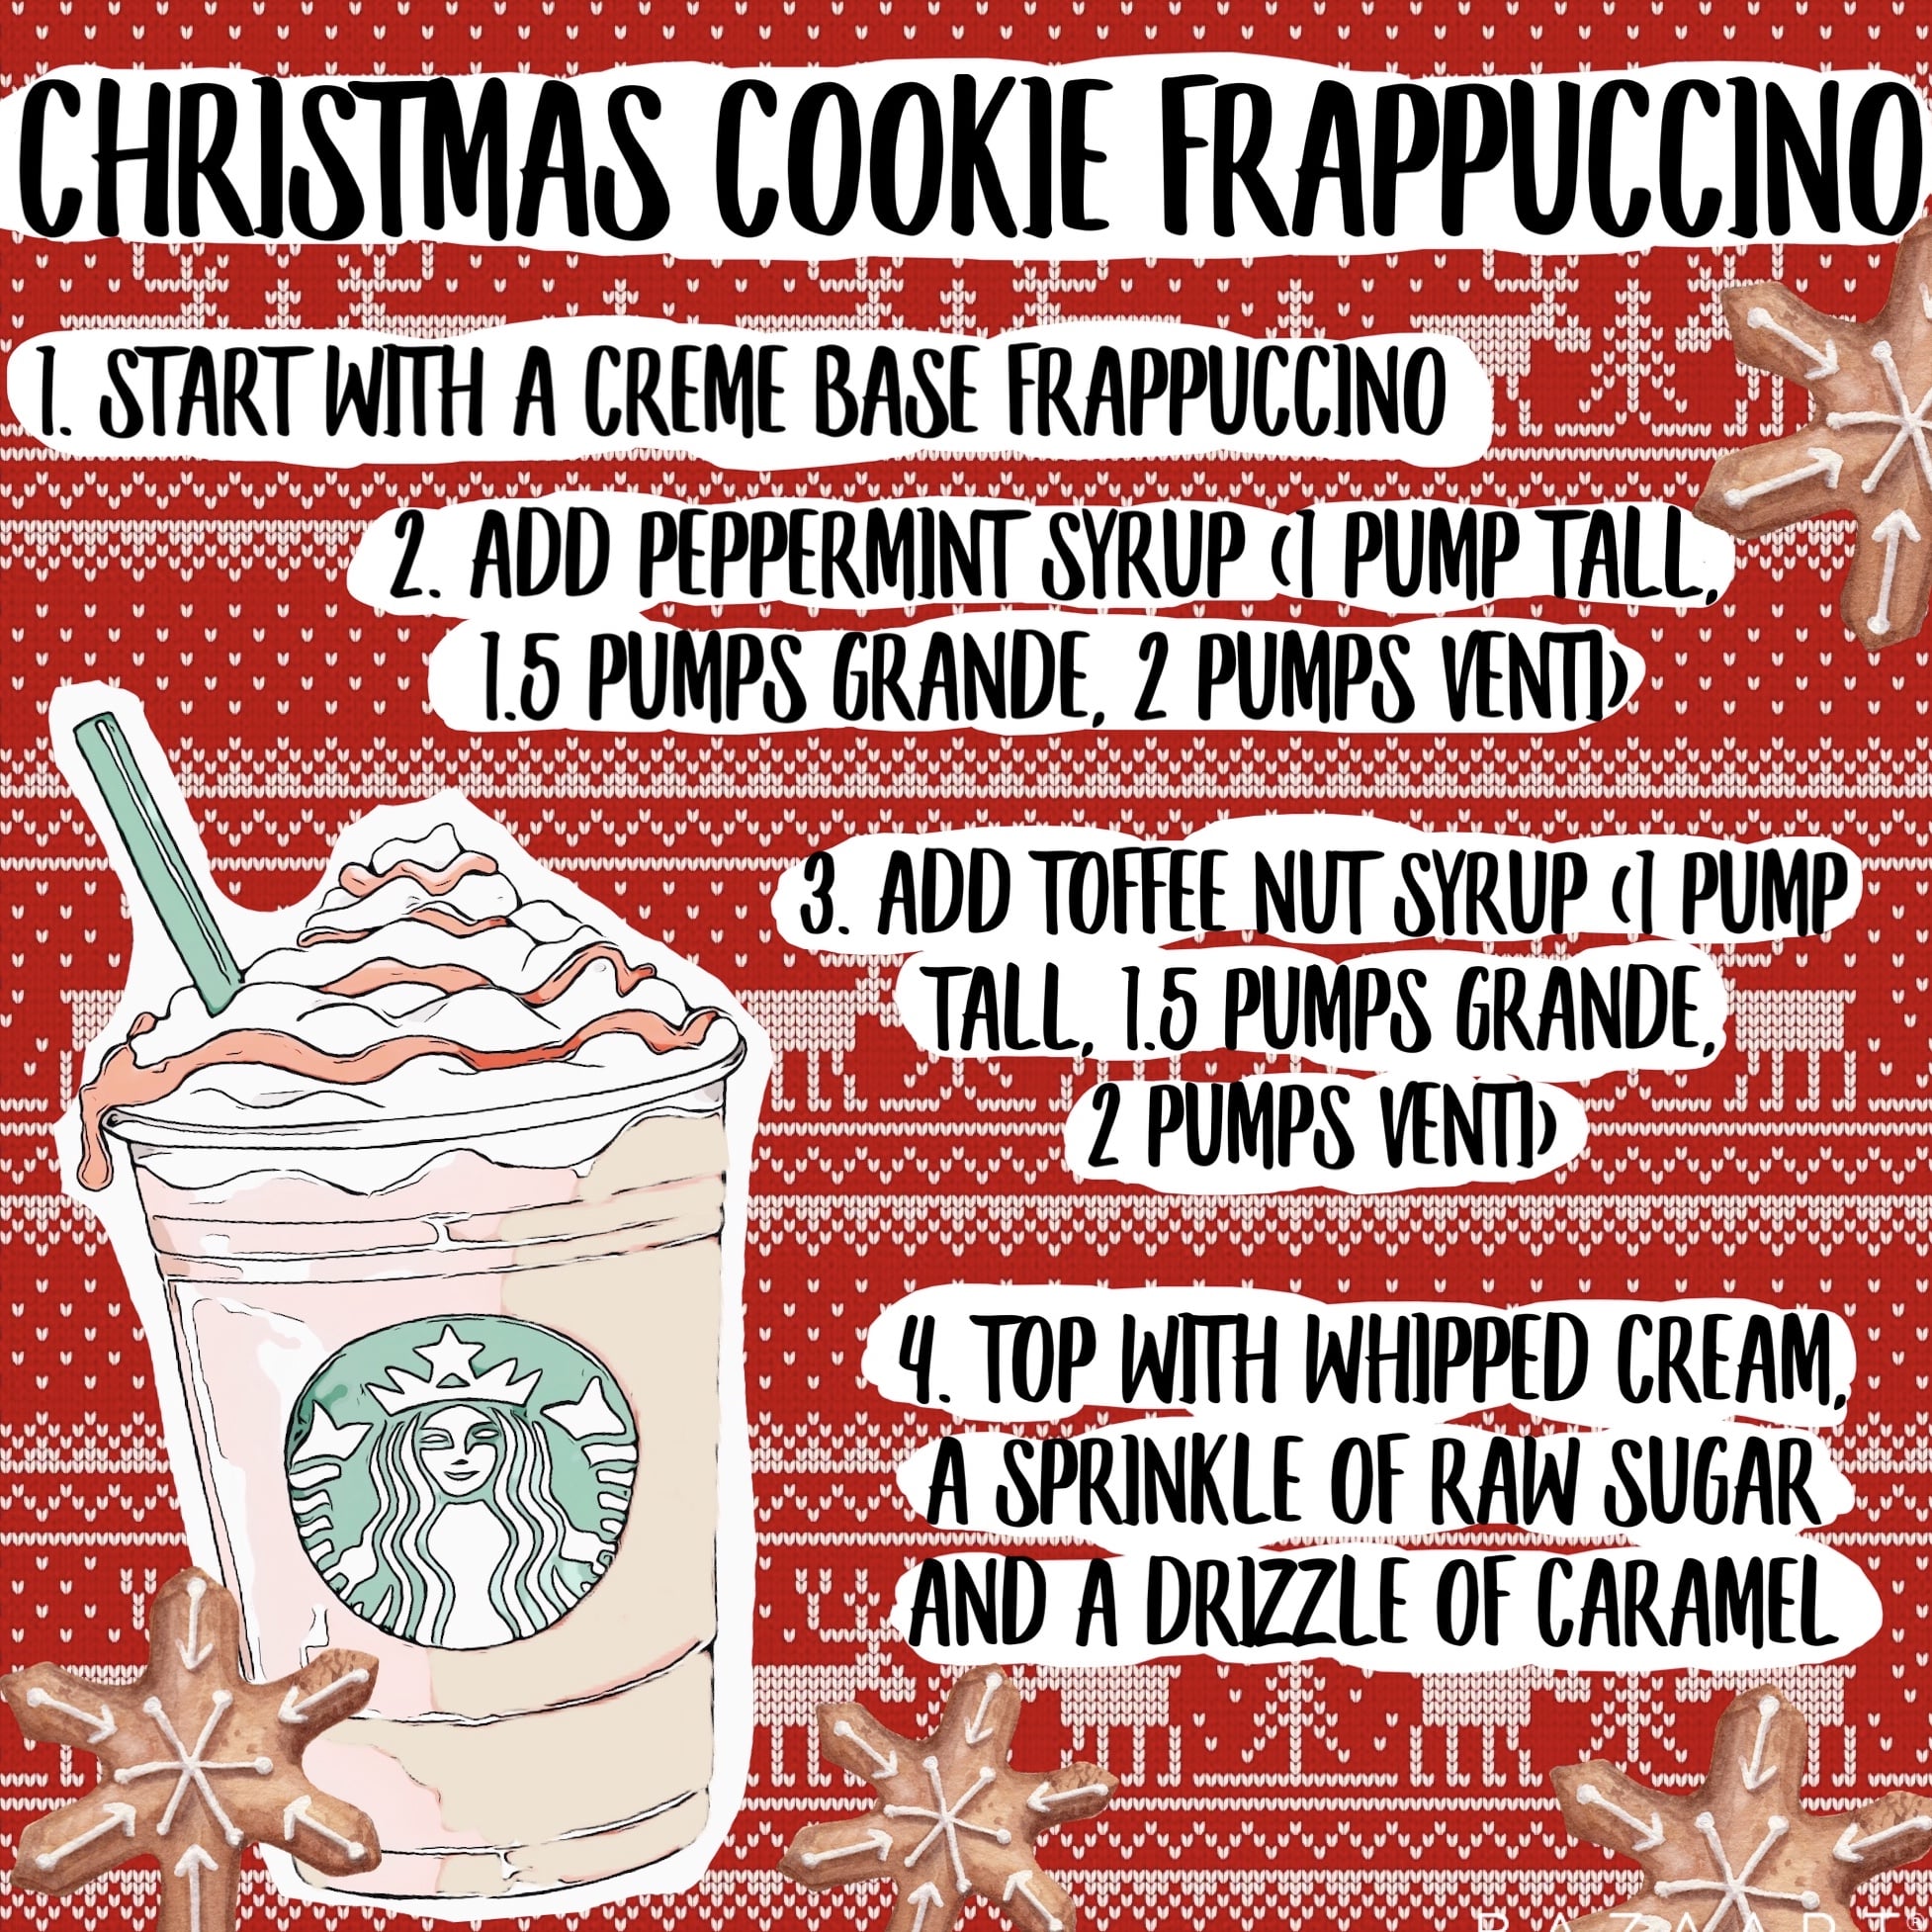 It's Official: My Favorite Starbucks Holiday Drink Is Off the Menu